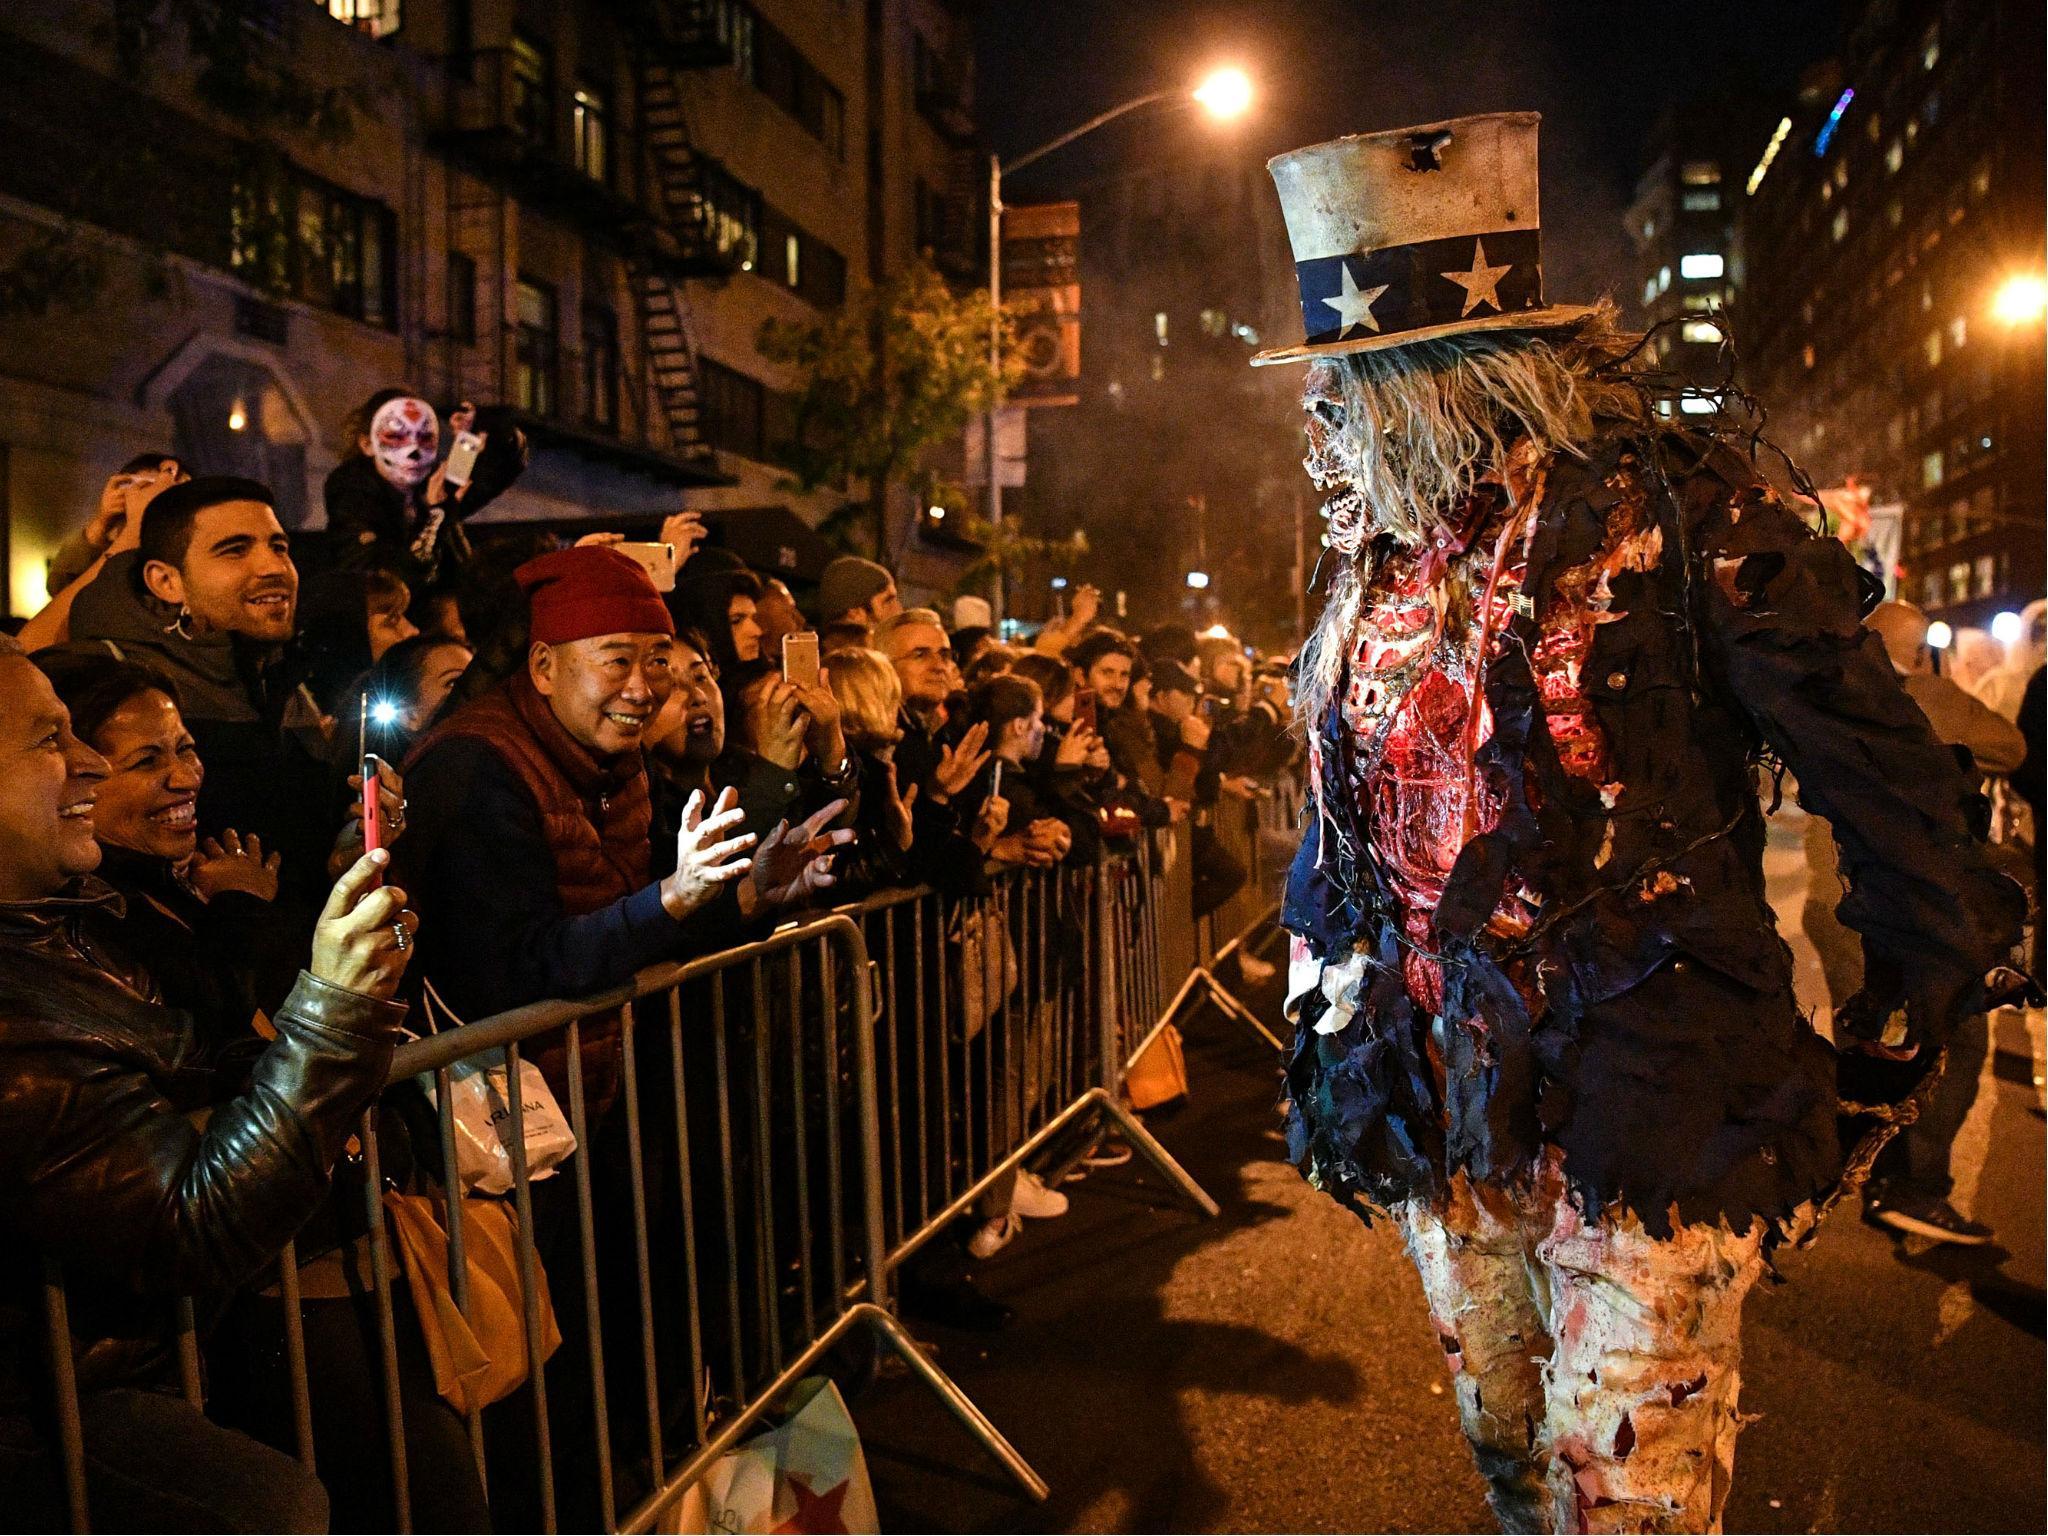 New Yorkers lined the street to celebrate Halloween